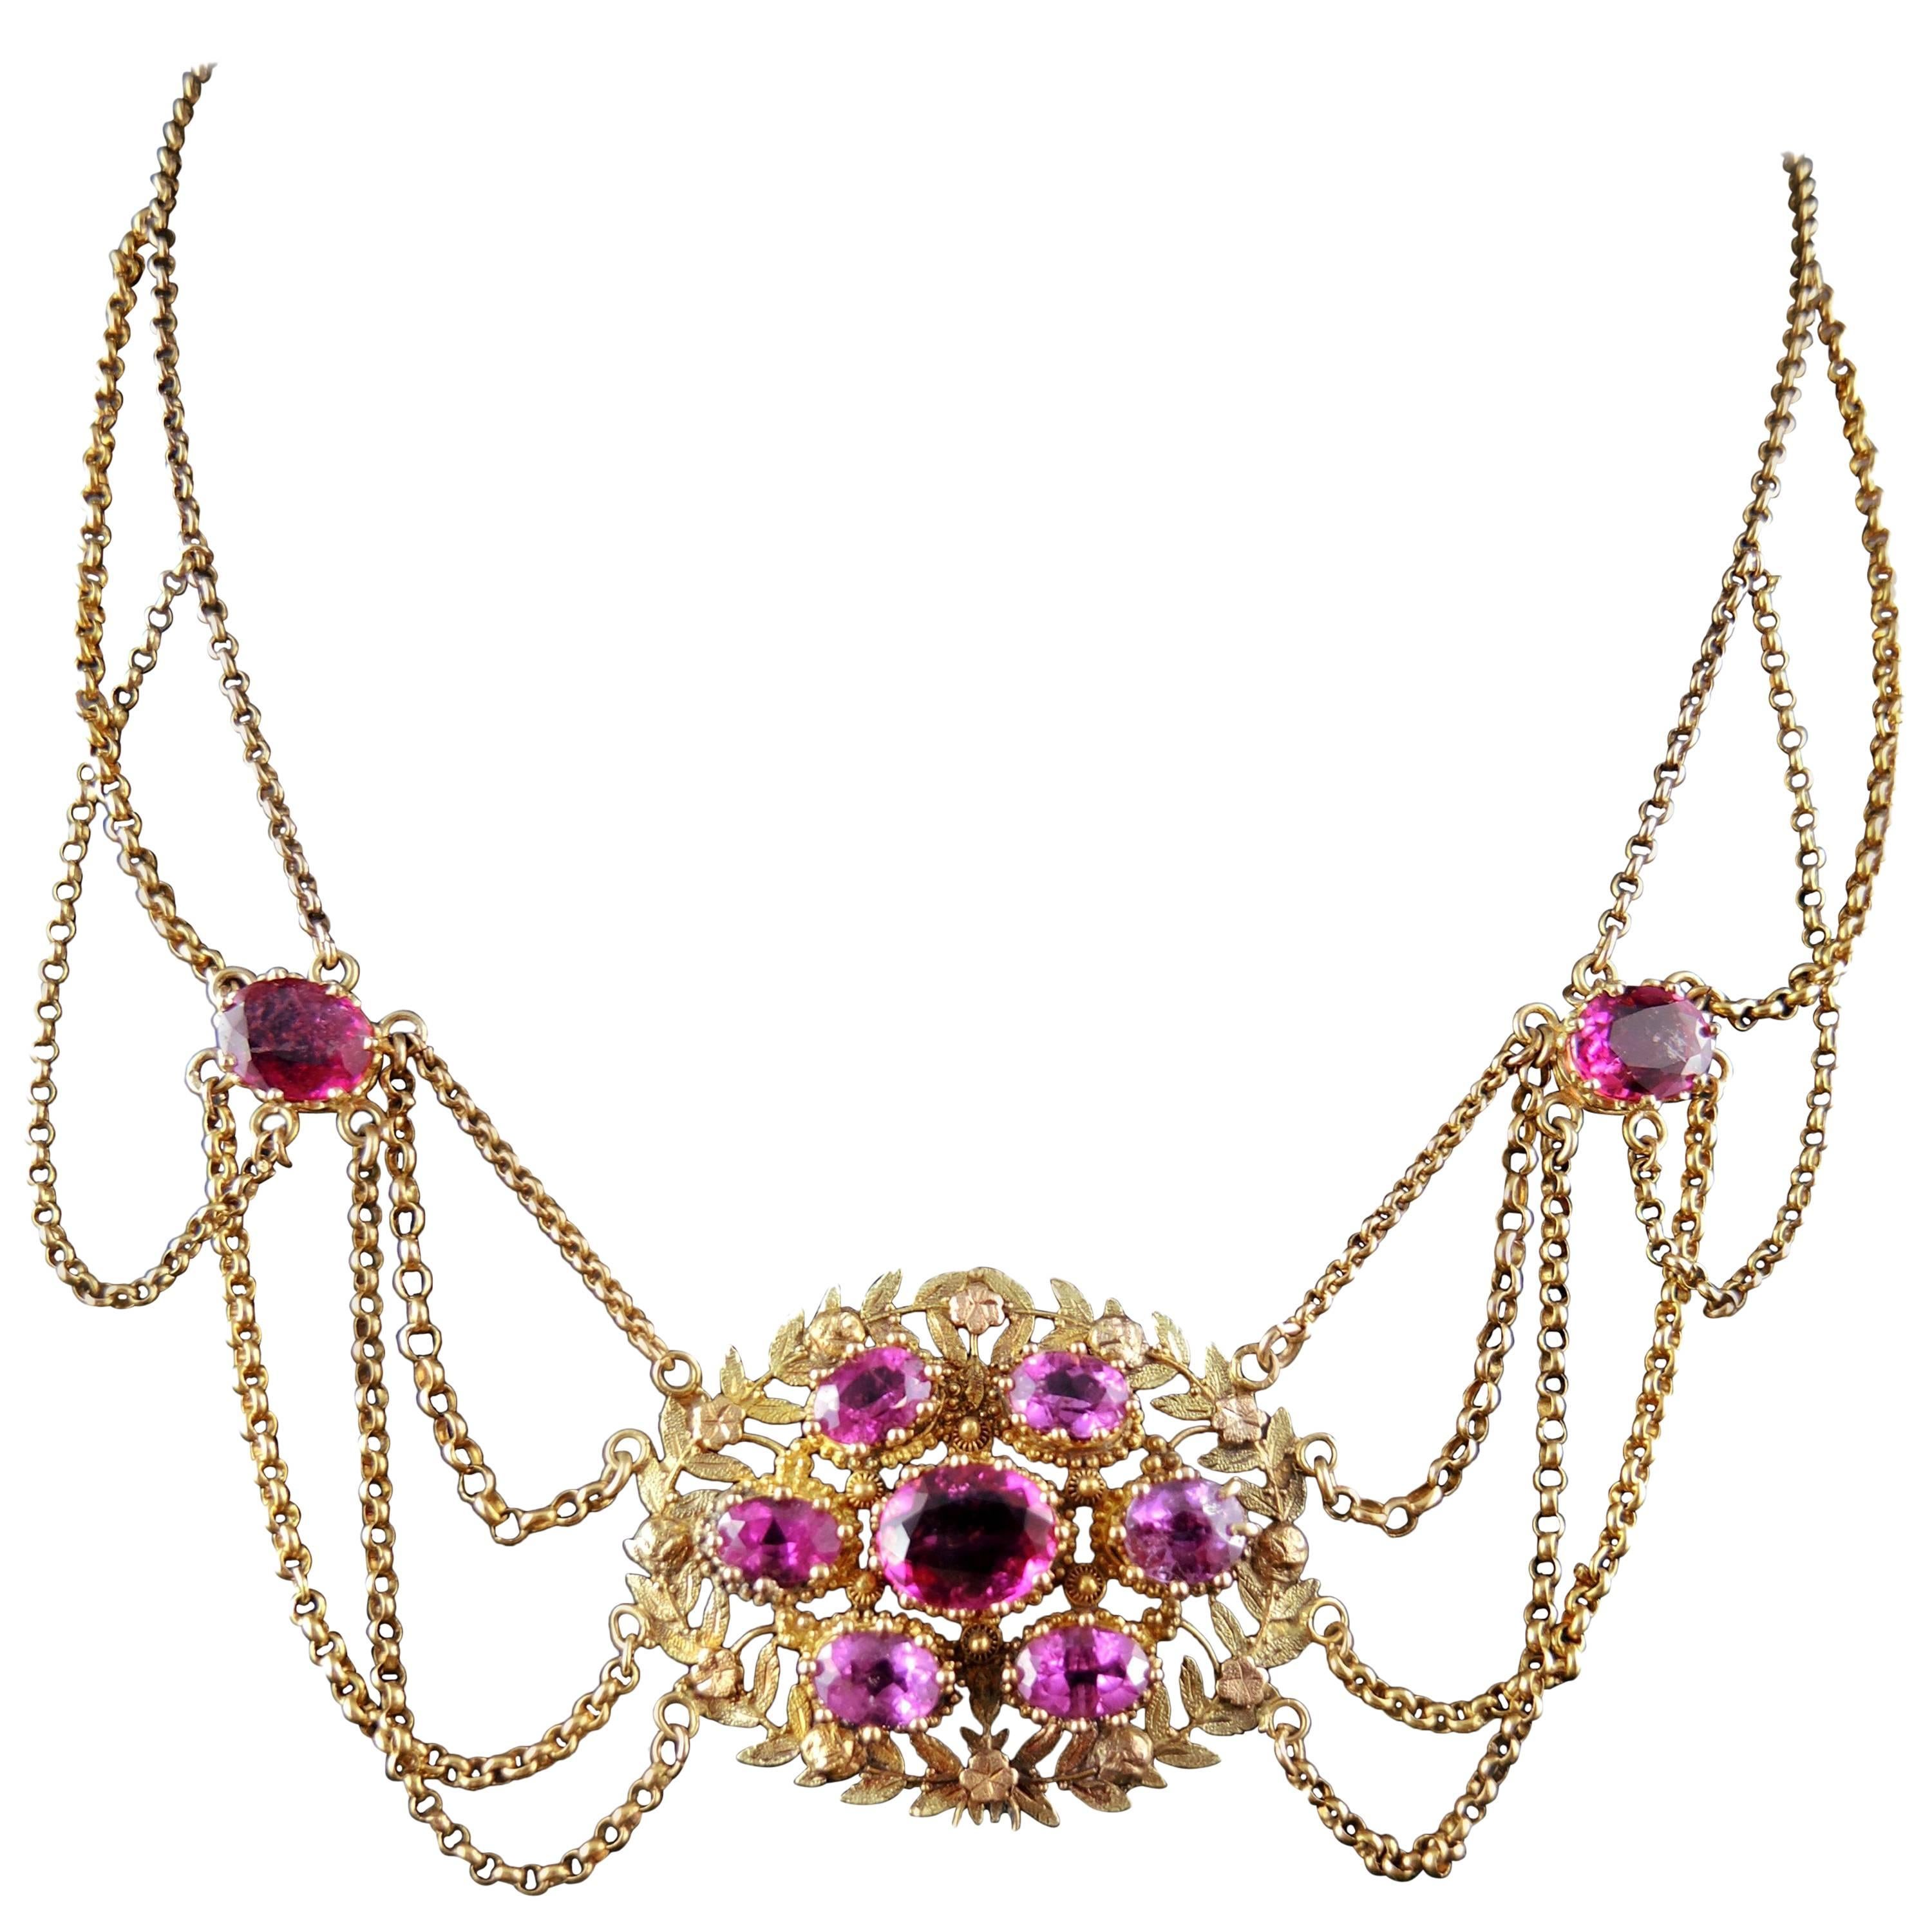 Early 19th Century Esclavage Multistrand Necklace with Pink Tourmalines